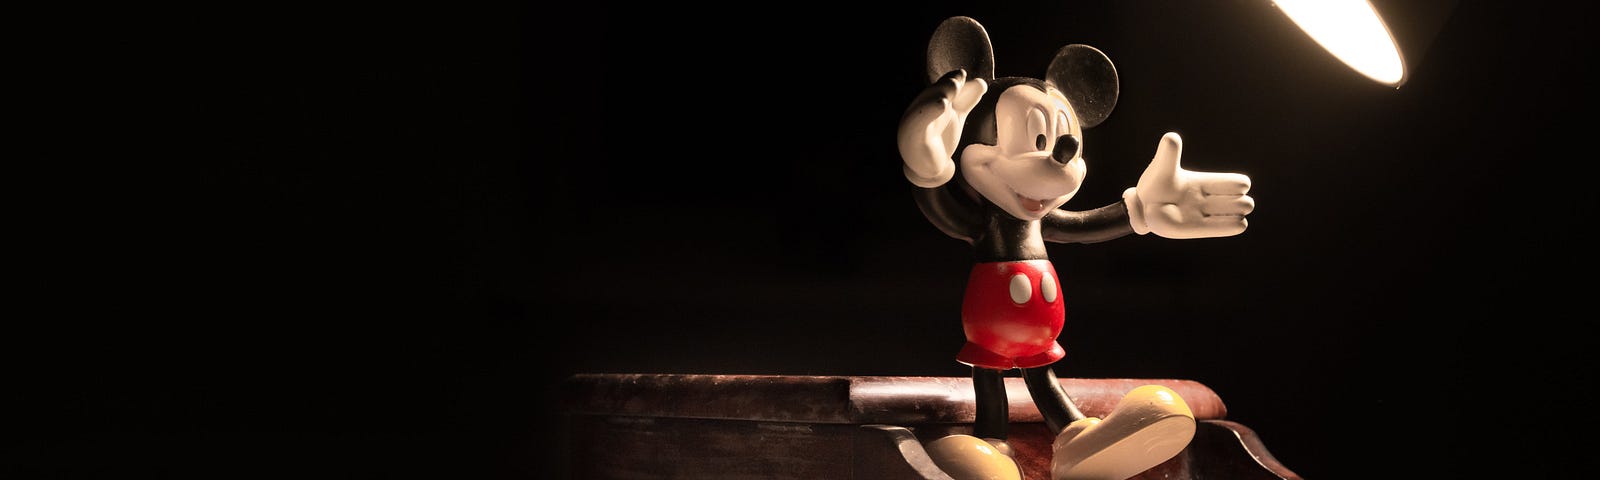 Mickey Mouse standing in the spotlight on a grand piano.